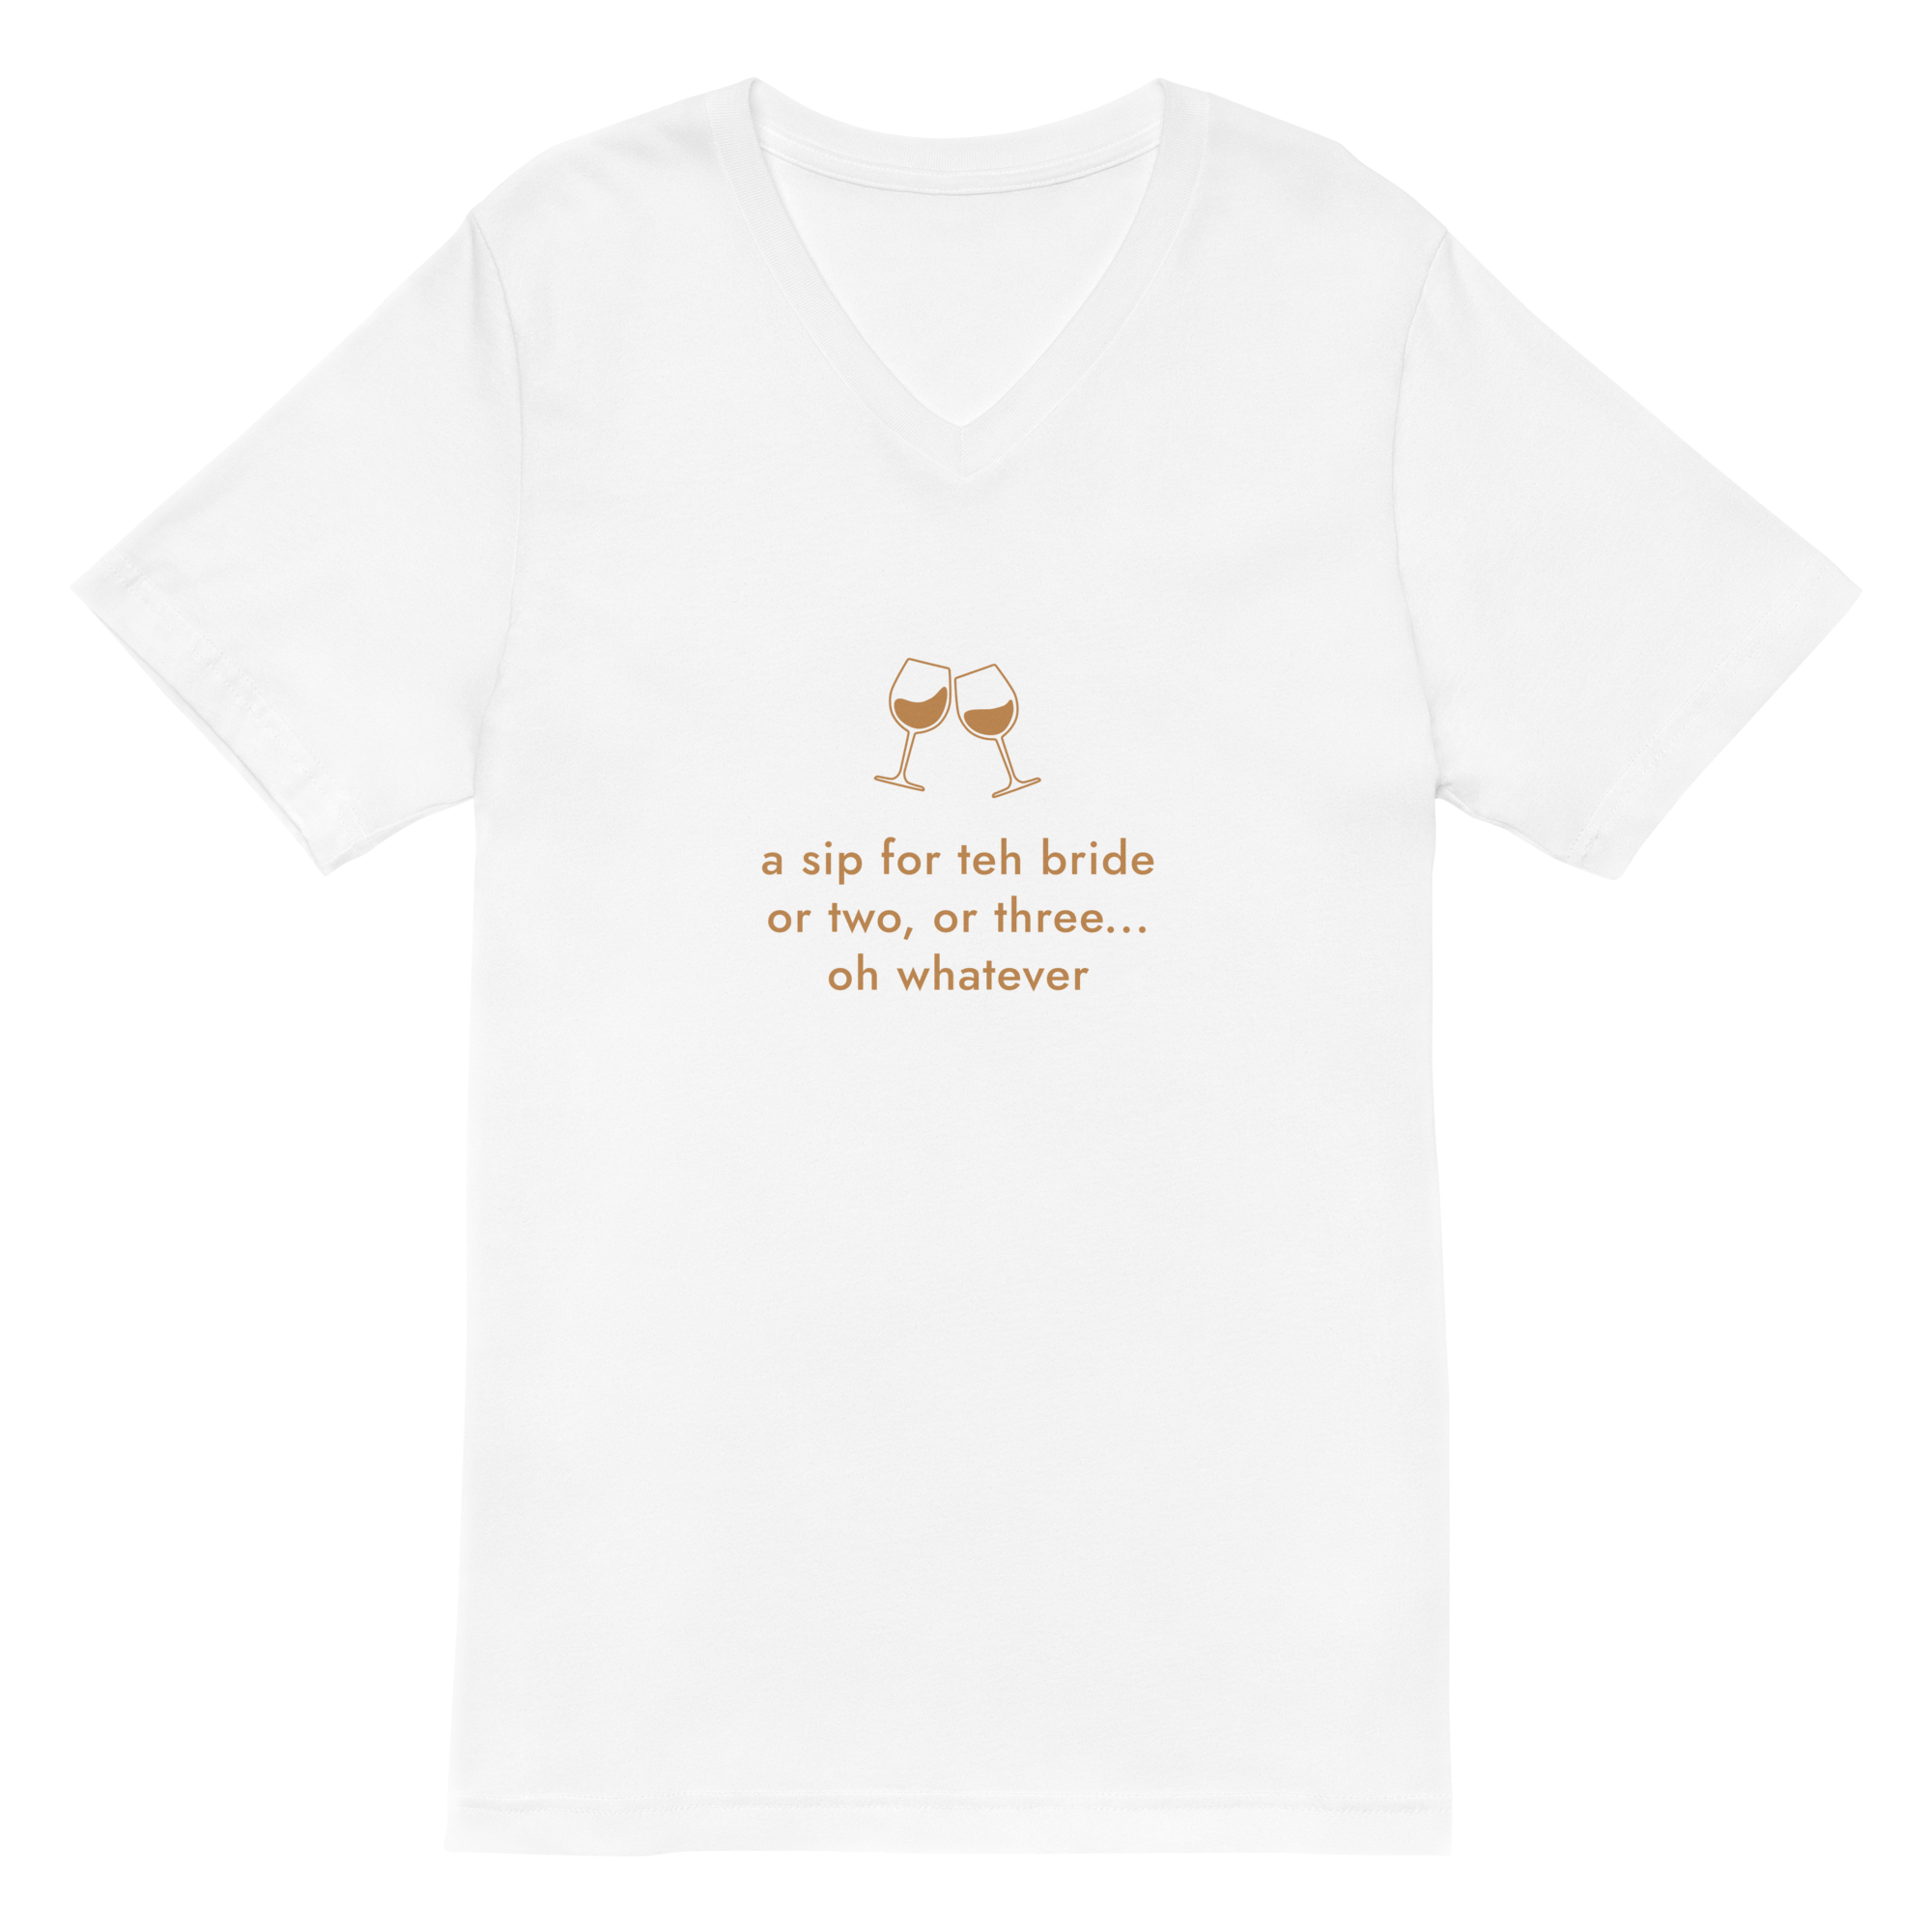 A SIP FOR THE BRIDE T-SHIRT